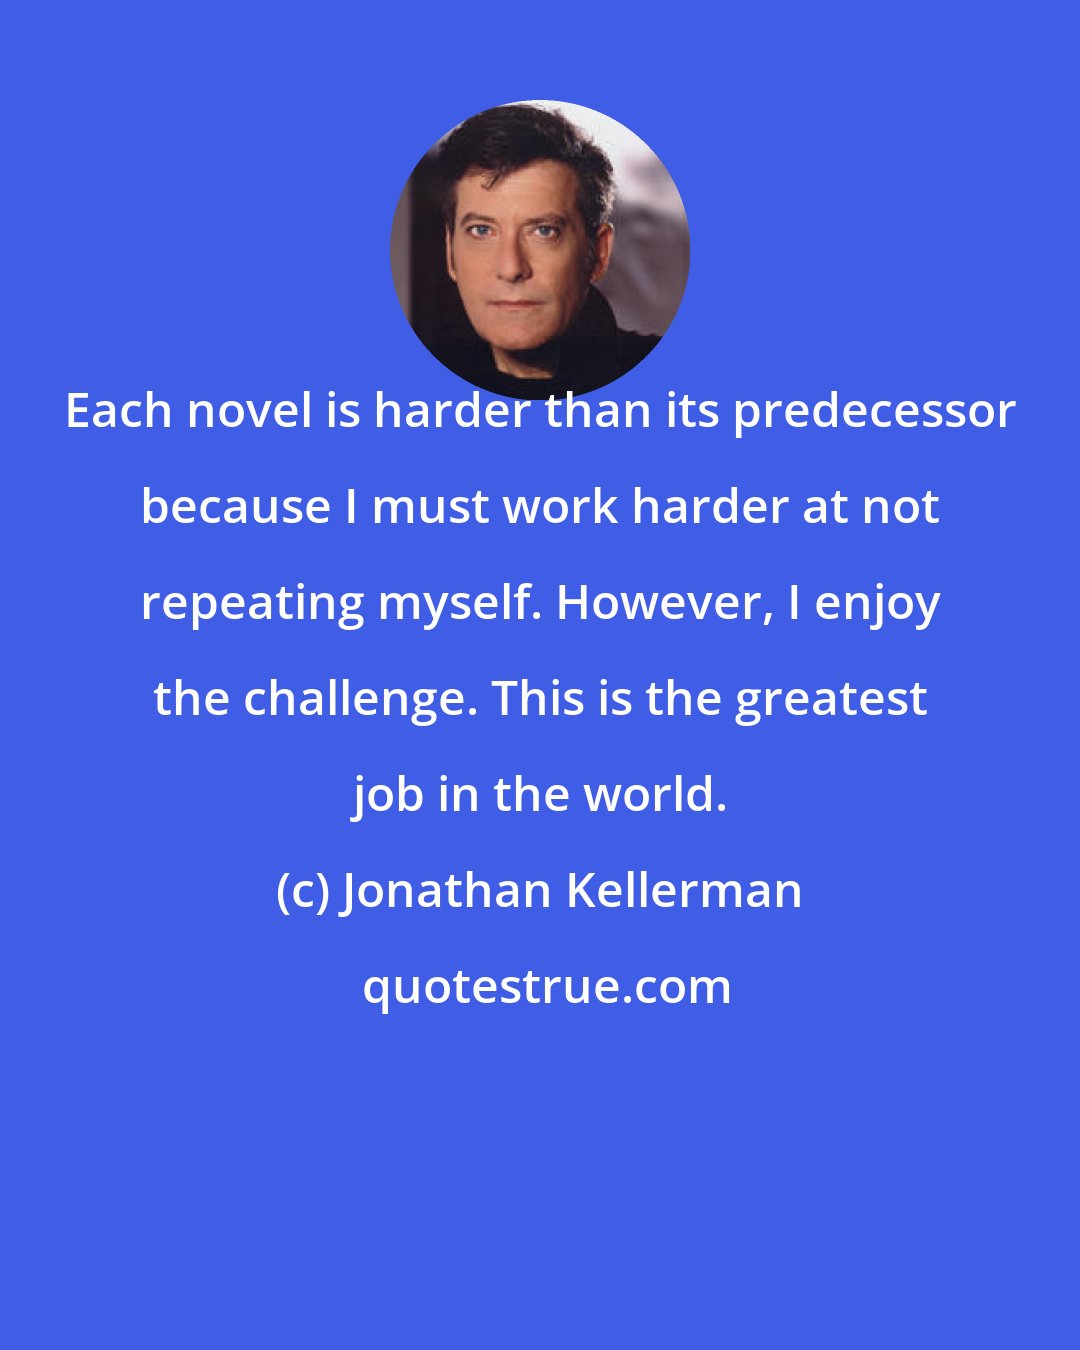 Jonathan Kellerman: Each novel is harder than its predecessor because I must work harder at not repeating myself. However, I enjoy the challenge. This is the greatest job in the world.